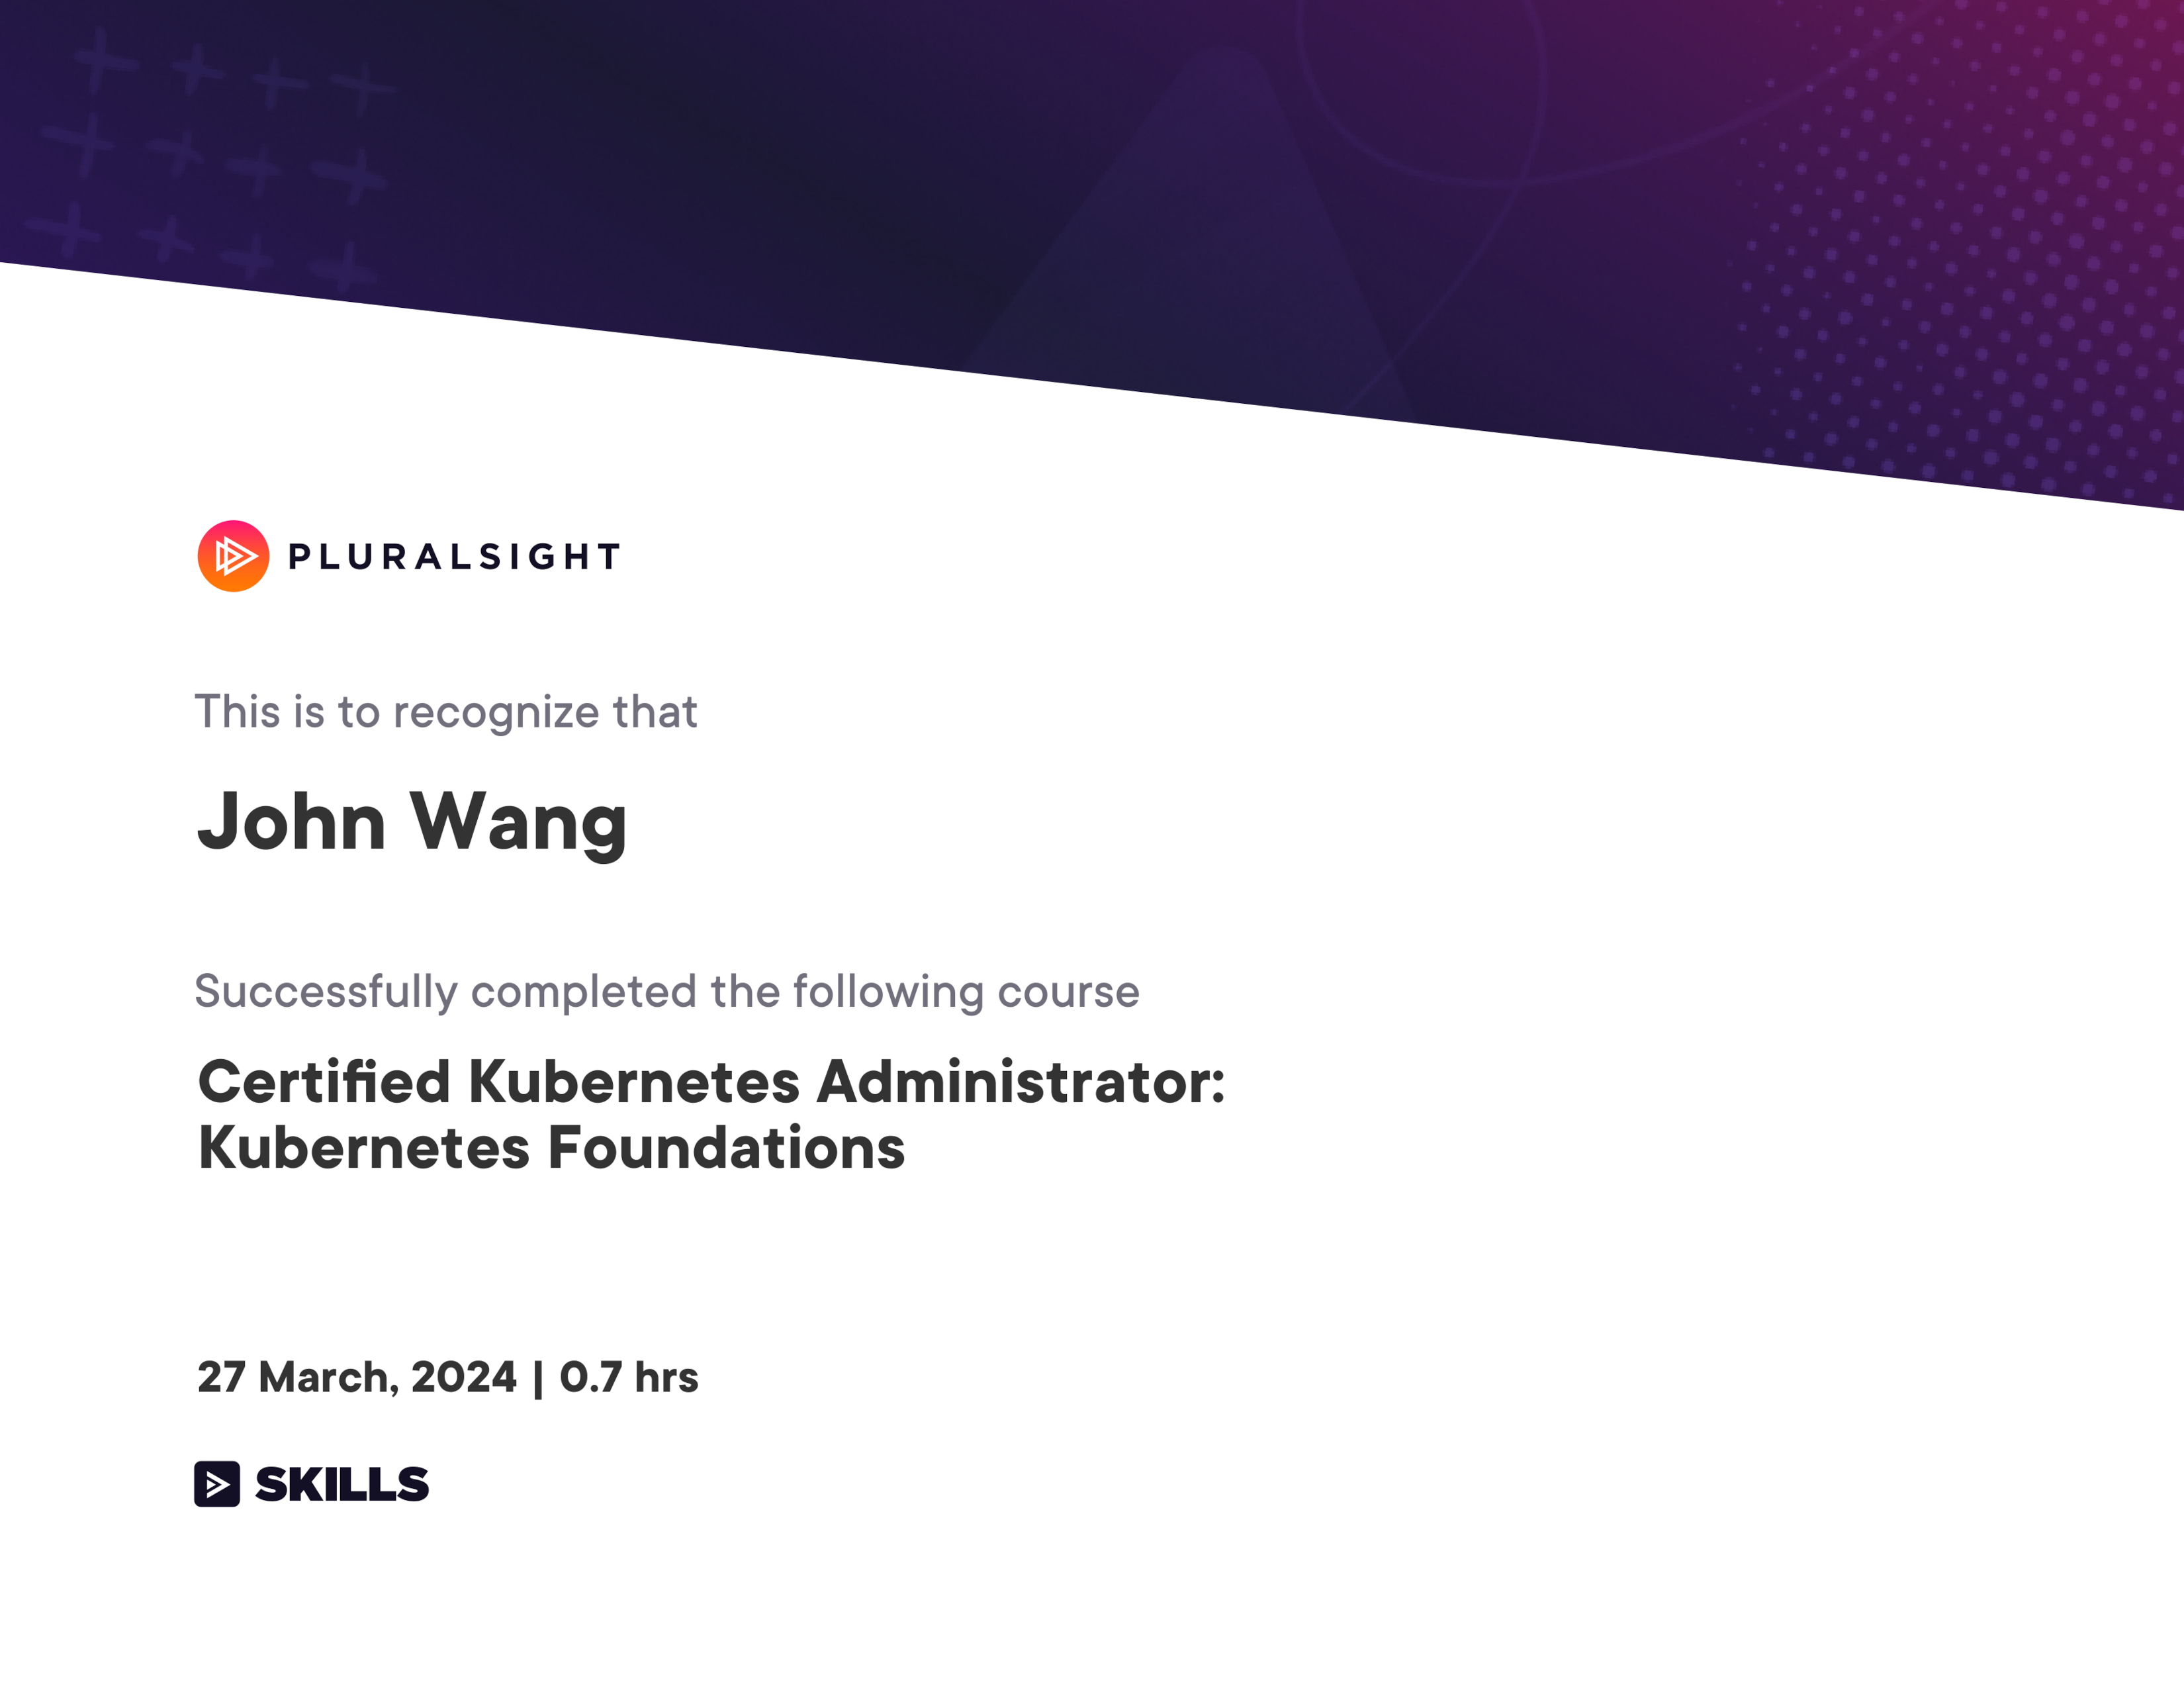 John's Certified Kubernetes Administrator: Kubernetes Foundations from Pluralsight by Anthony Nocentino